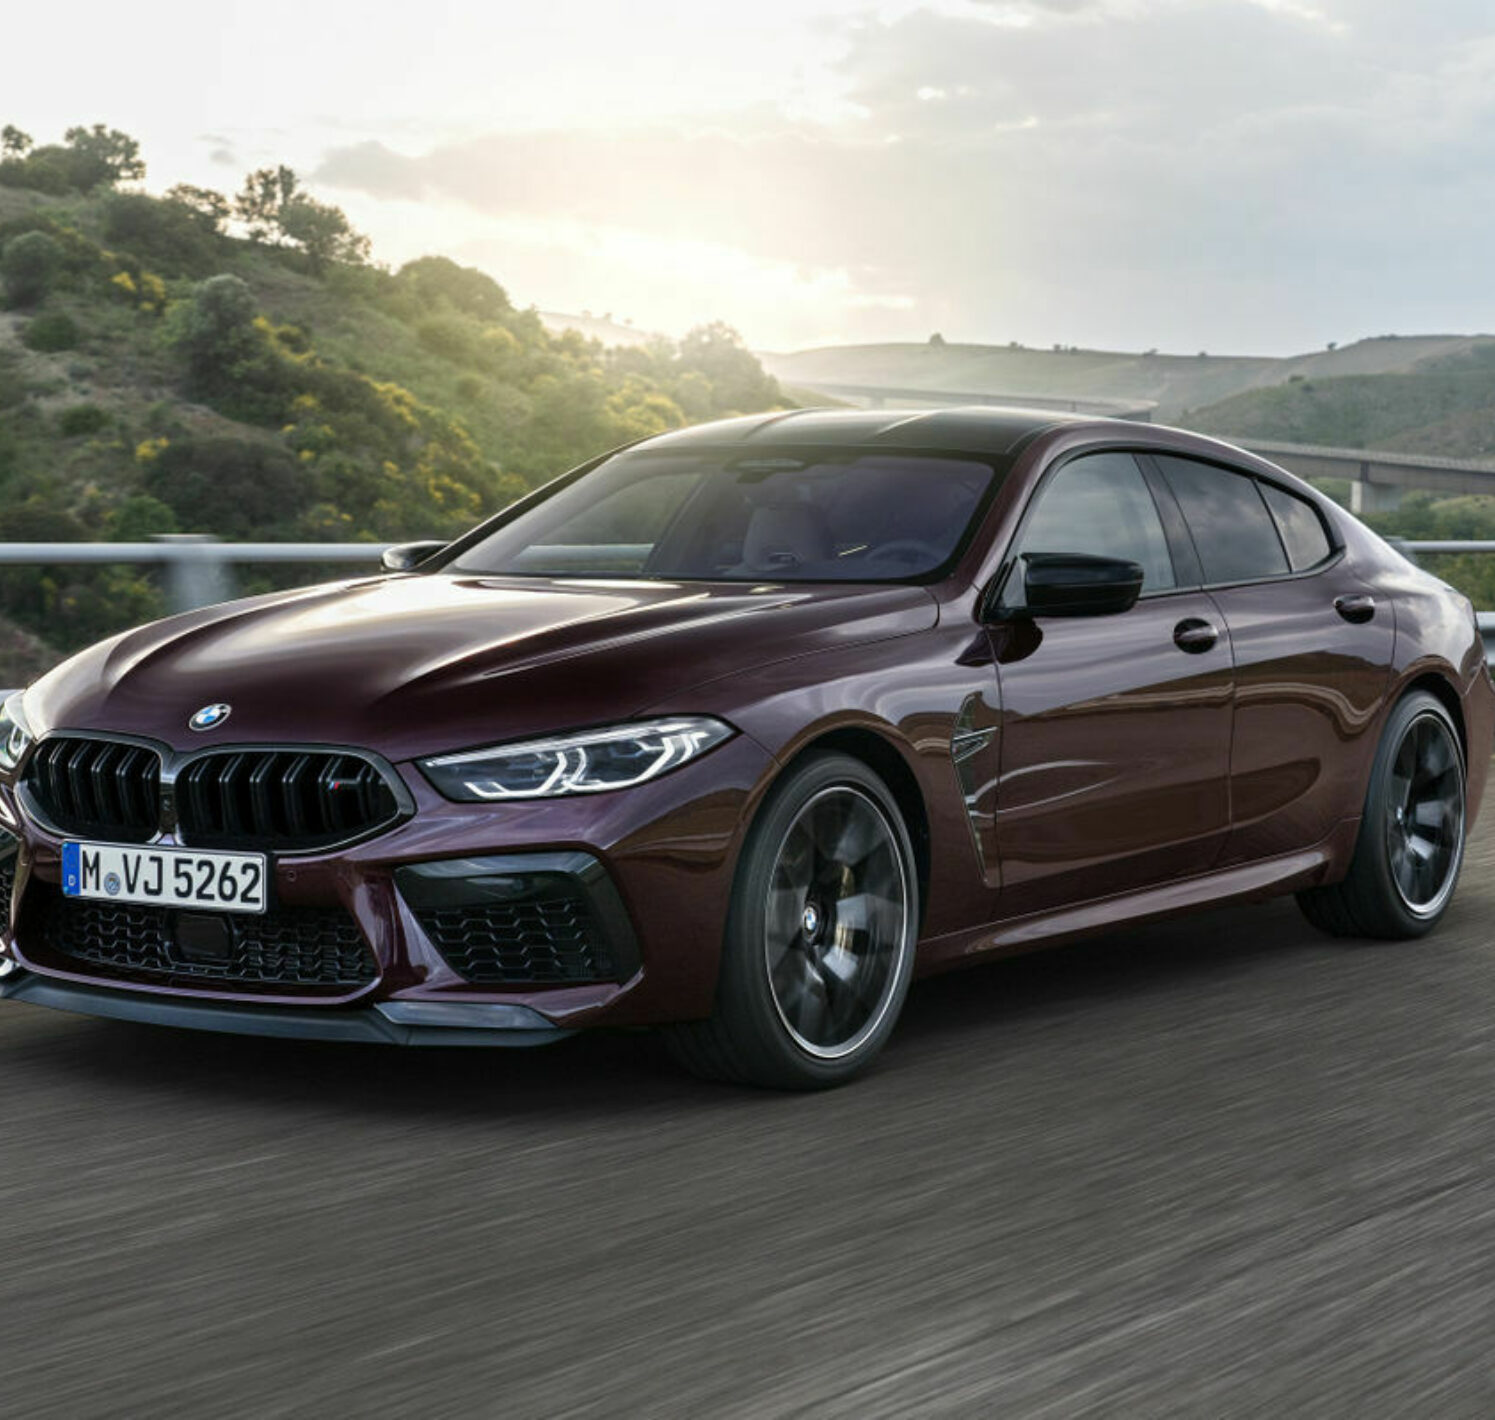 https://autofilter.sk/assets/images/rad-8-gran-coupe-2/gallery/p90369597-high-res-the-new-bmw-m8-gran-galeria.jpg - obrazok